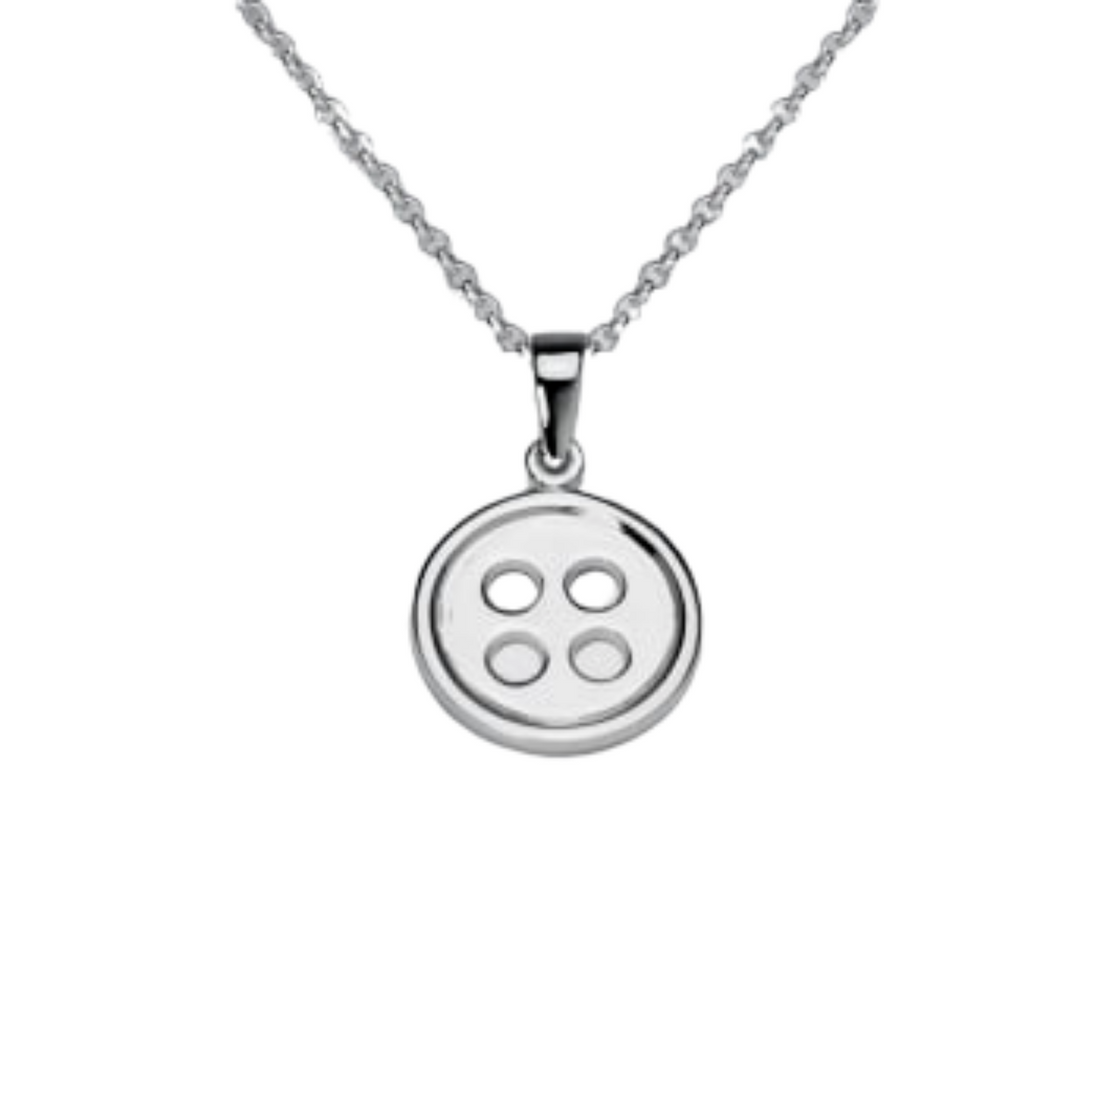 Button necklace on a chain crafted in sterling silver with a high polish finish.